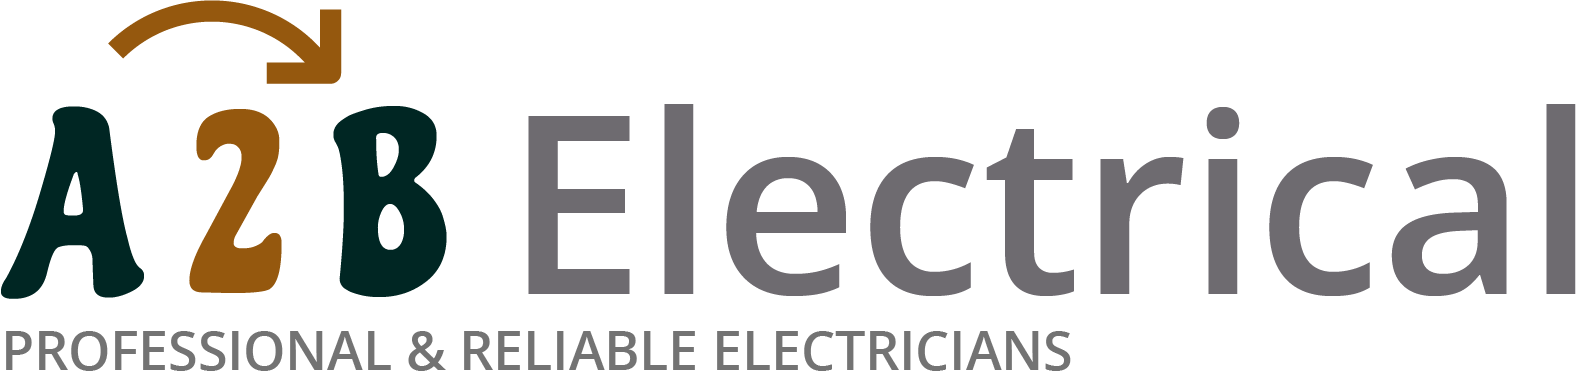 If you have electrical wiring problems in Harrow, we can provide an electrician to have a look for you. 